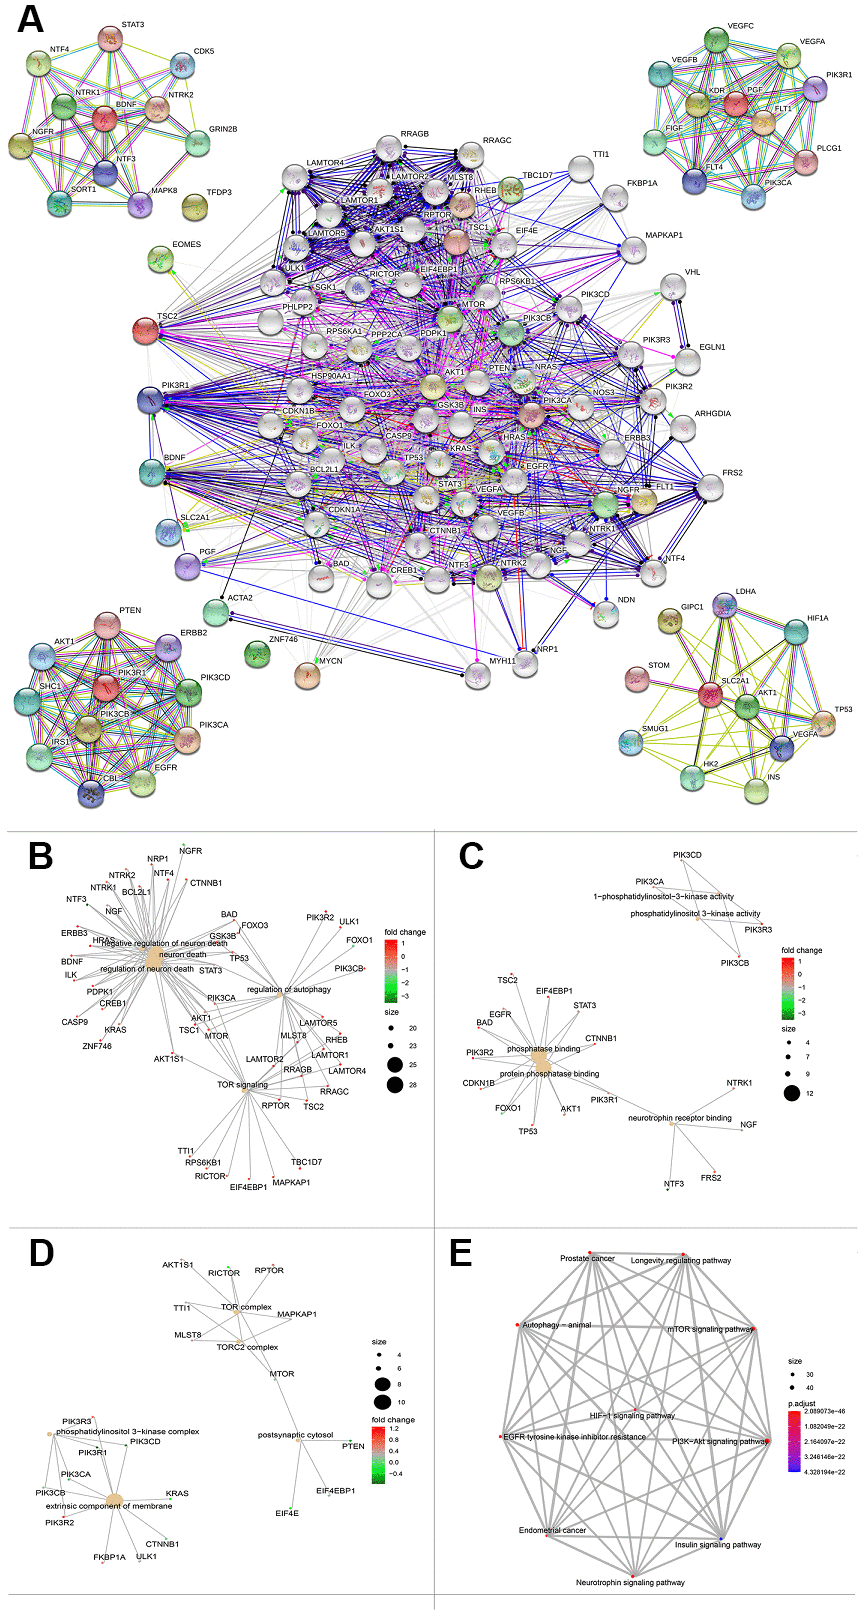 Protein protein interaction network and functional enrichment of ten gene signature. (A) PPI network of the proteins that have been confirmed to interact directly or indirectly with the 10 risk genes from STRING database with confidence > 0.4 as cutoff. (B–D) Gene-concept network represents the results for biological process, molecular function and cellular component of Gene ontology analysis based on 80 protein-protein interaction network genes respectively. Each plot shows the enrichment entry with the largest number of genes, and the differences level of each in HCC against normal tissue is represented by the color from green to red. PPI, Protein protein interaction. (E) KEGG pathway analysis results for the 80 protein-protein interaction network genes.